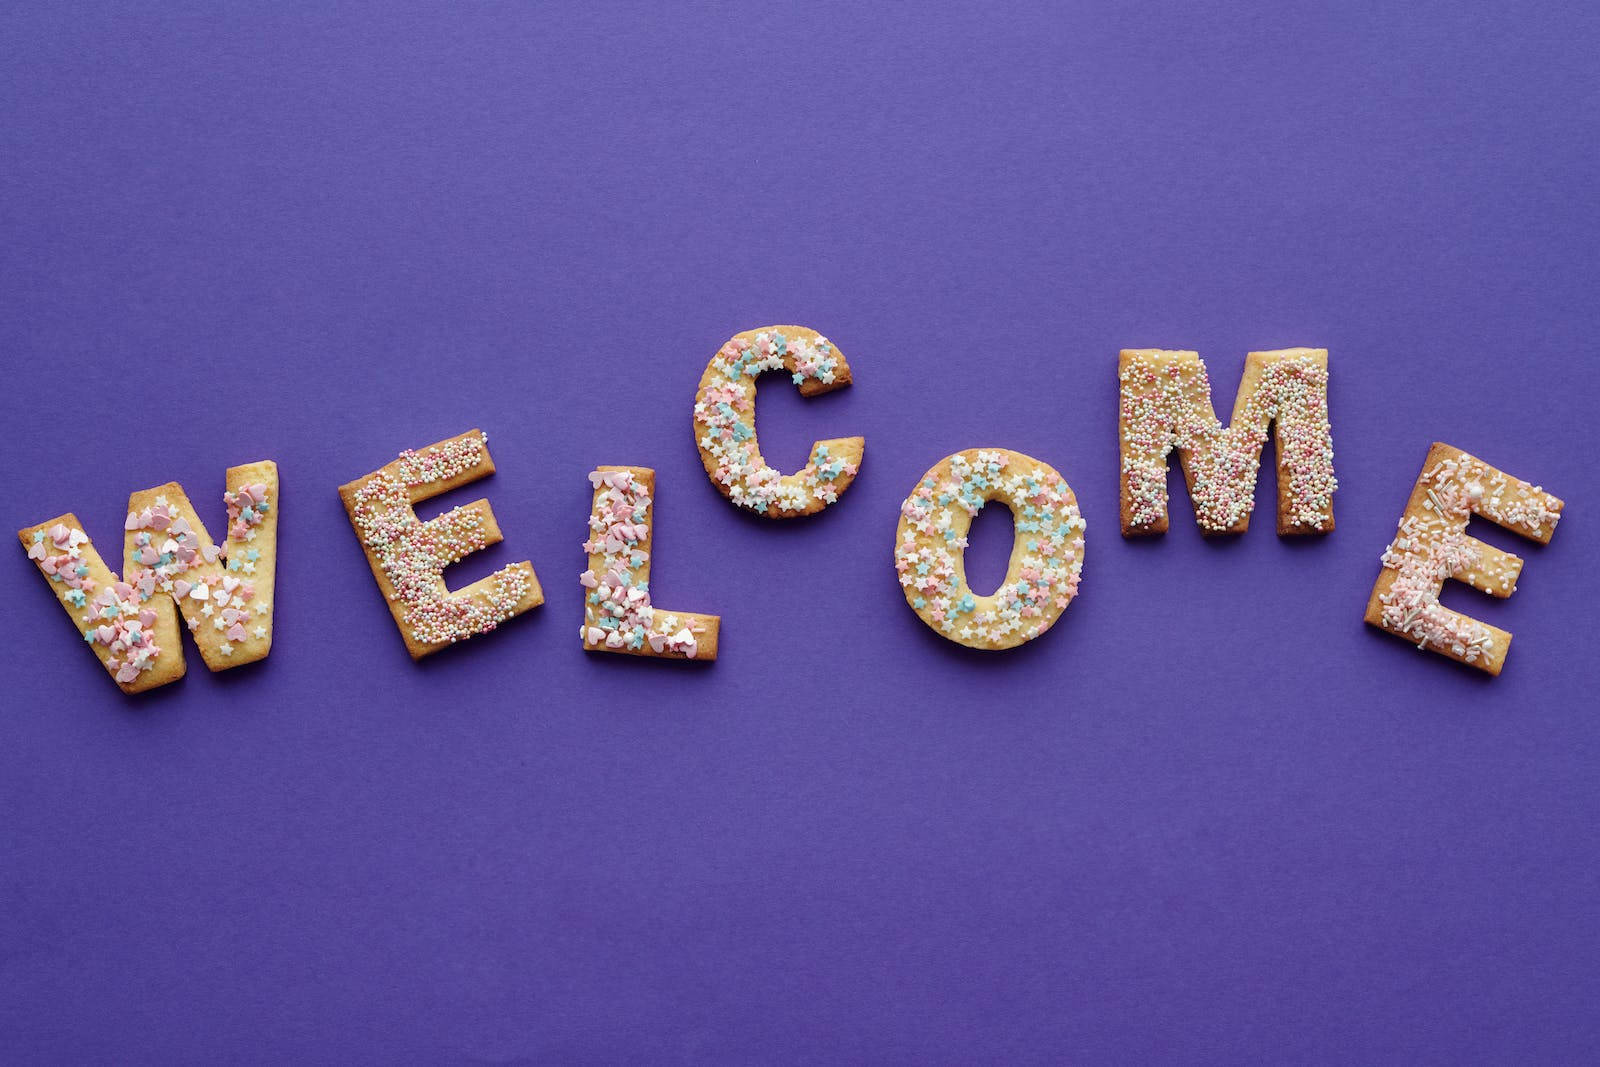 Caption: Delightful Welcome Cookies In Letter Shapes Background